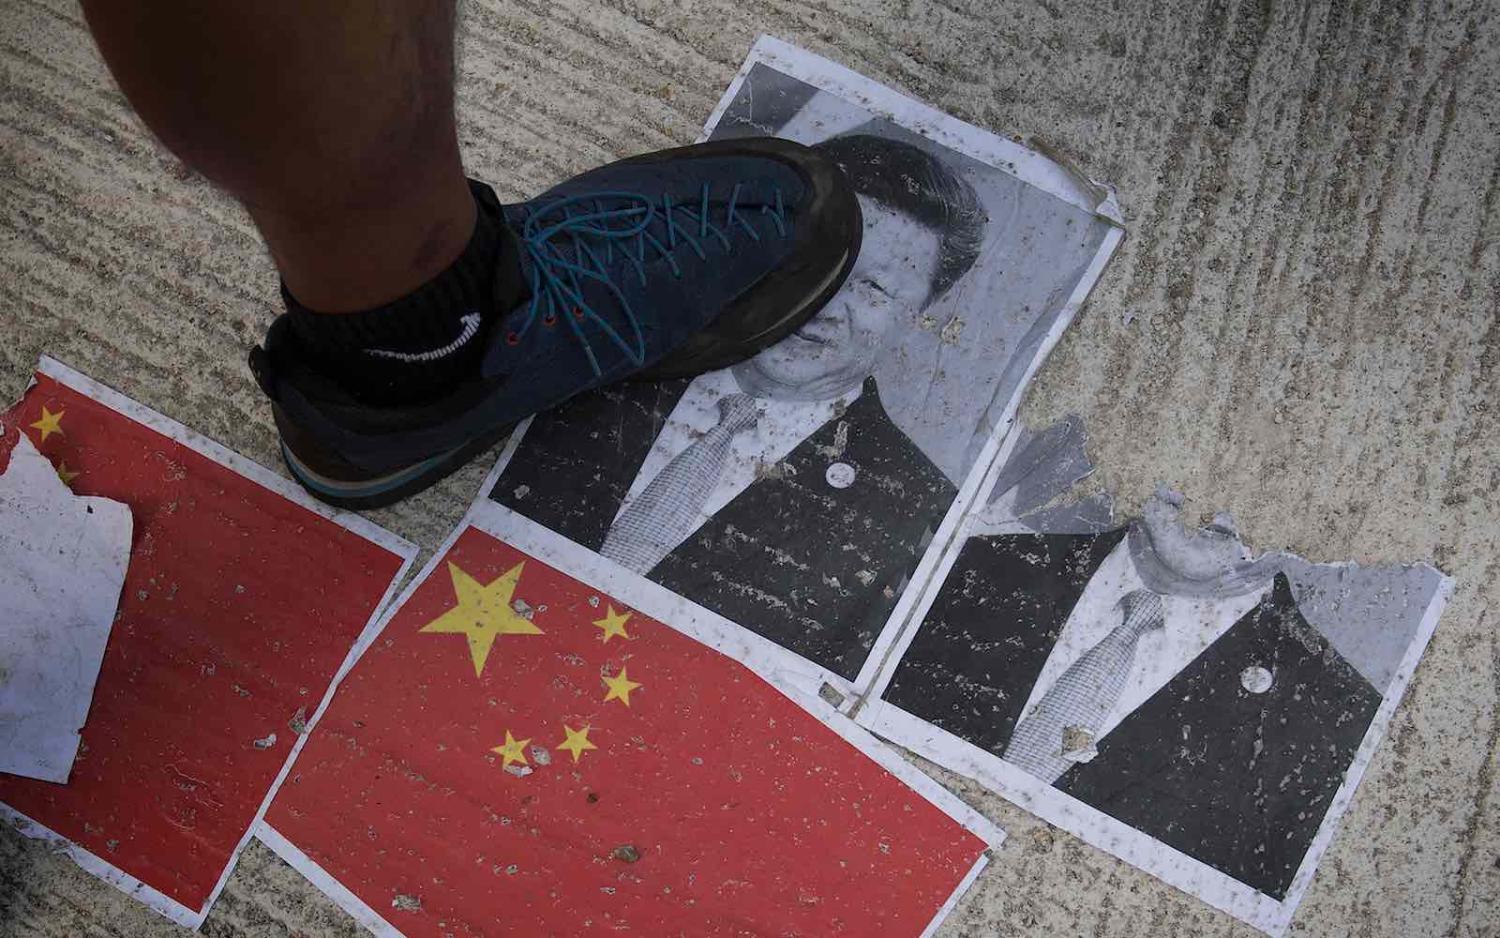 A protester treads on an image of Chinese President Xi Jinping in Hong Kong on 1 October 2019, the National Day marking the 70th anniversary of communist China’s founding. (Photo: Mark Ralston/AFP via Getty)